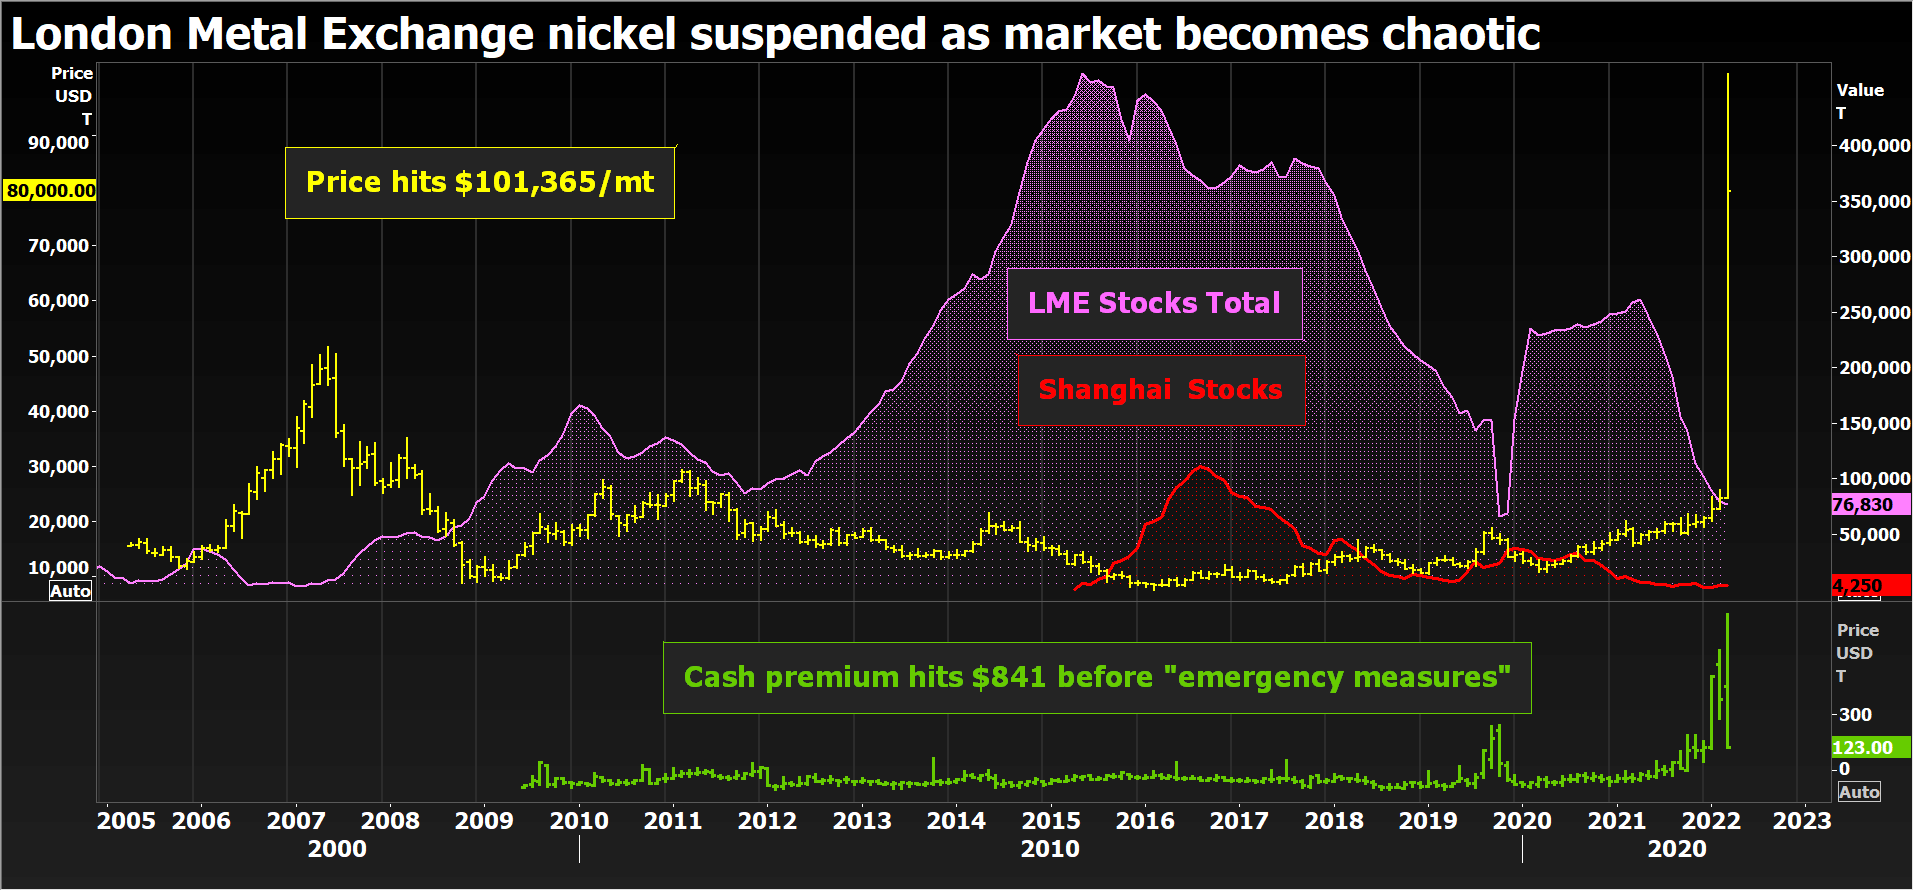 LME suspends nickel trading after market becomes chaotic